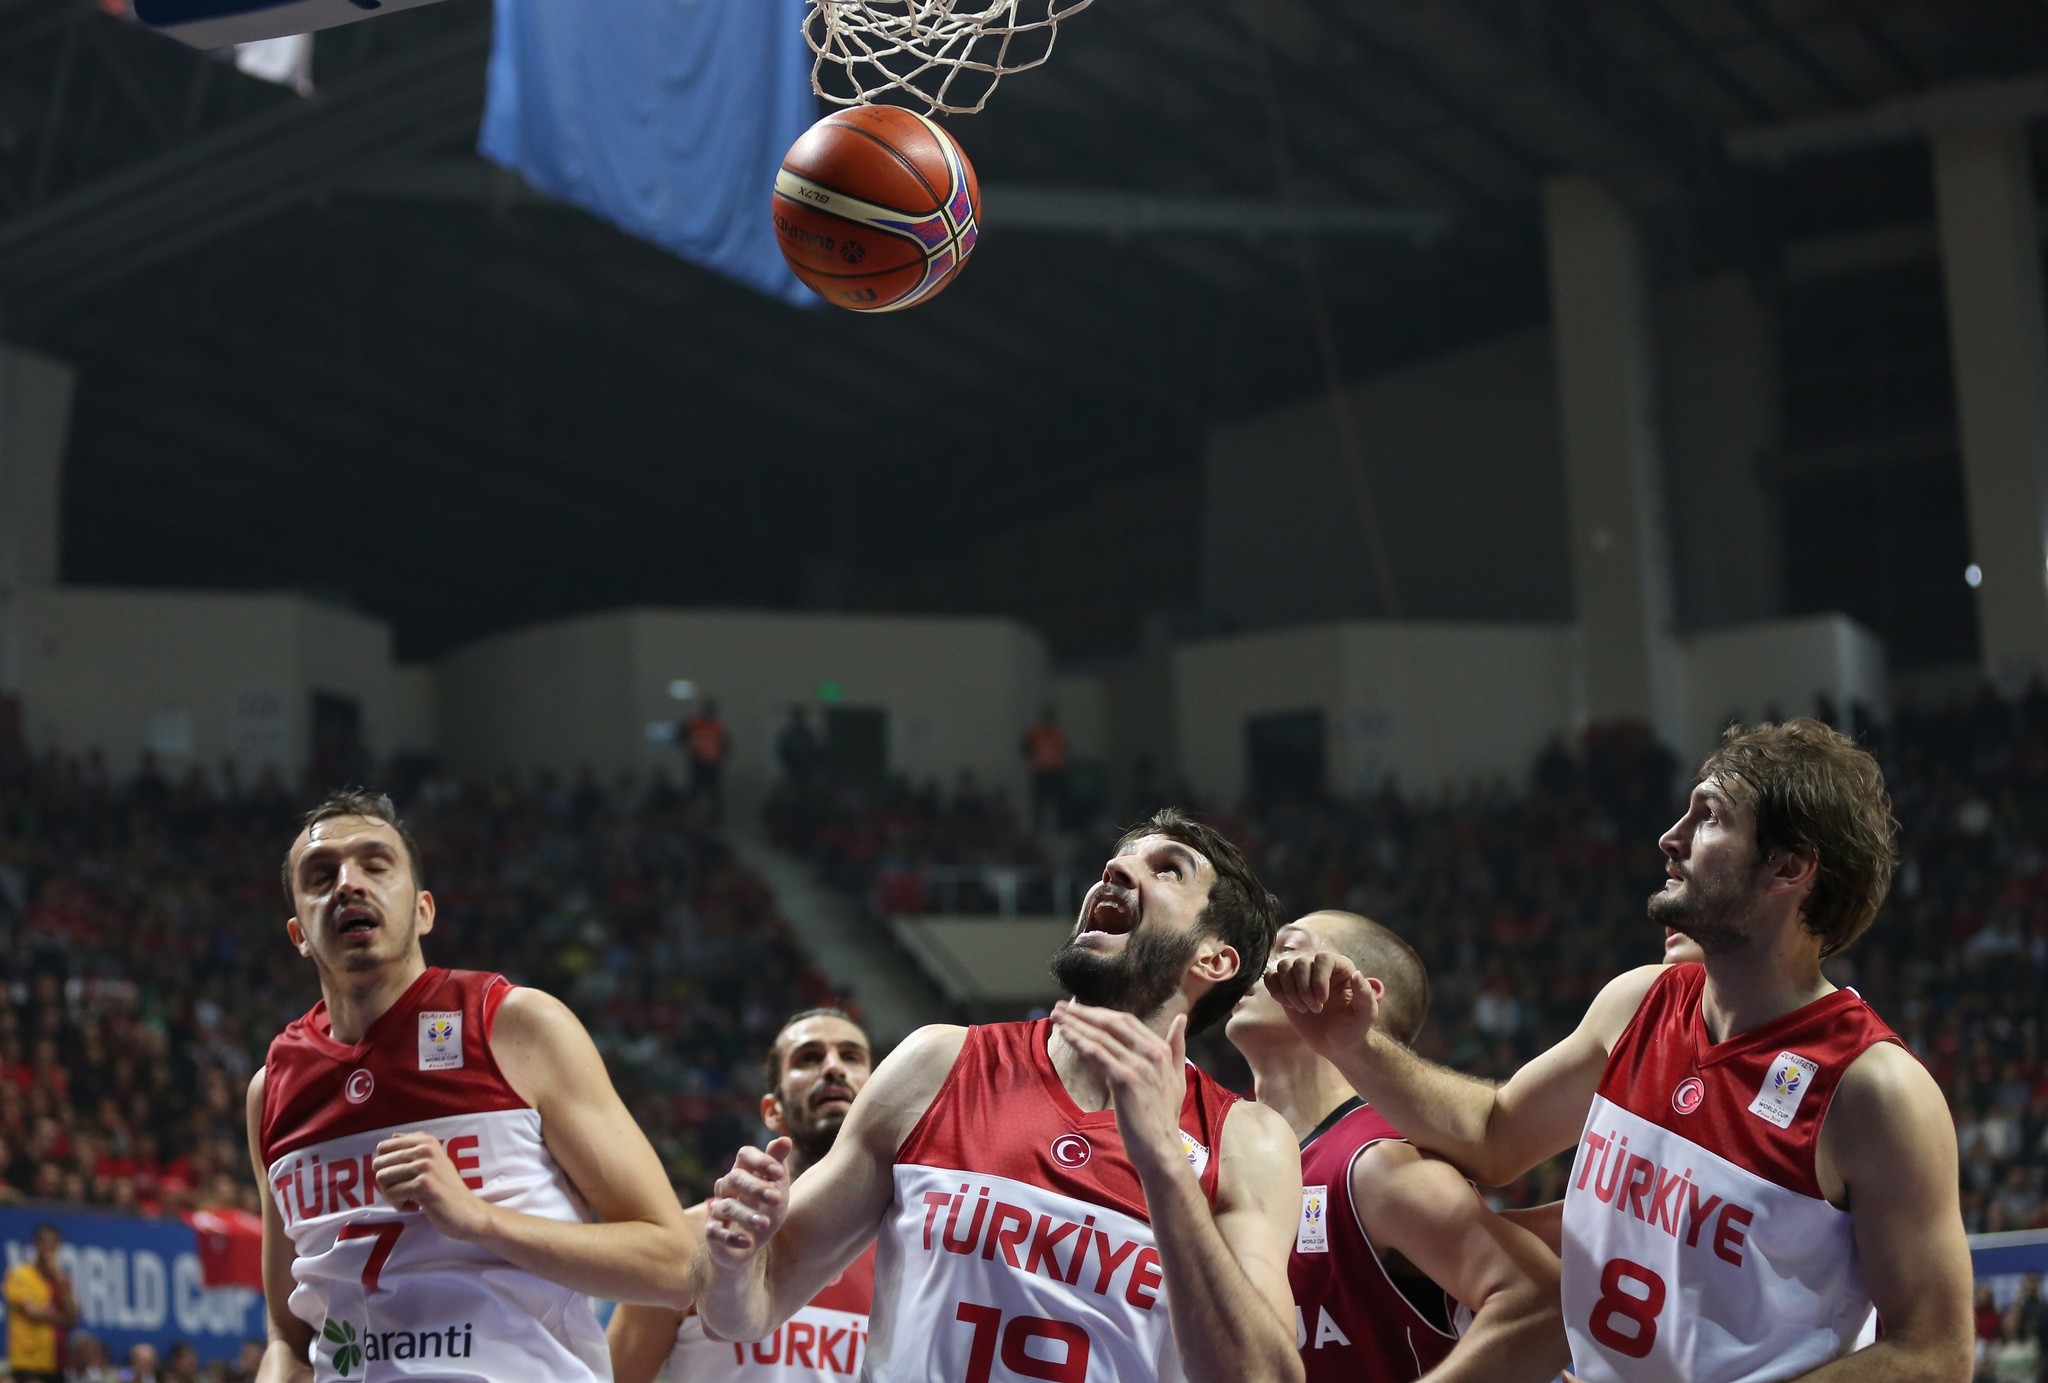 Turkey beats Latvia in 2019 basketball World Cup qualifier